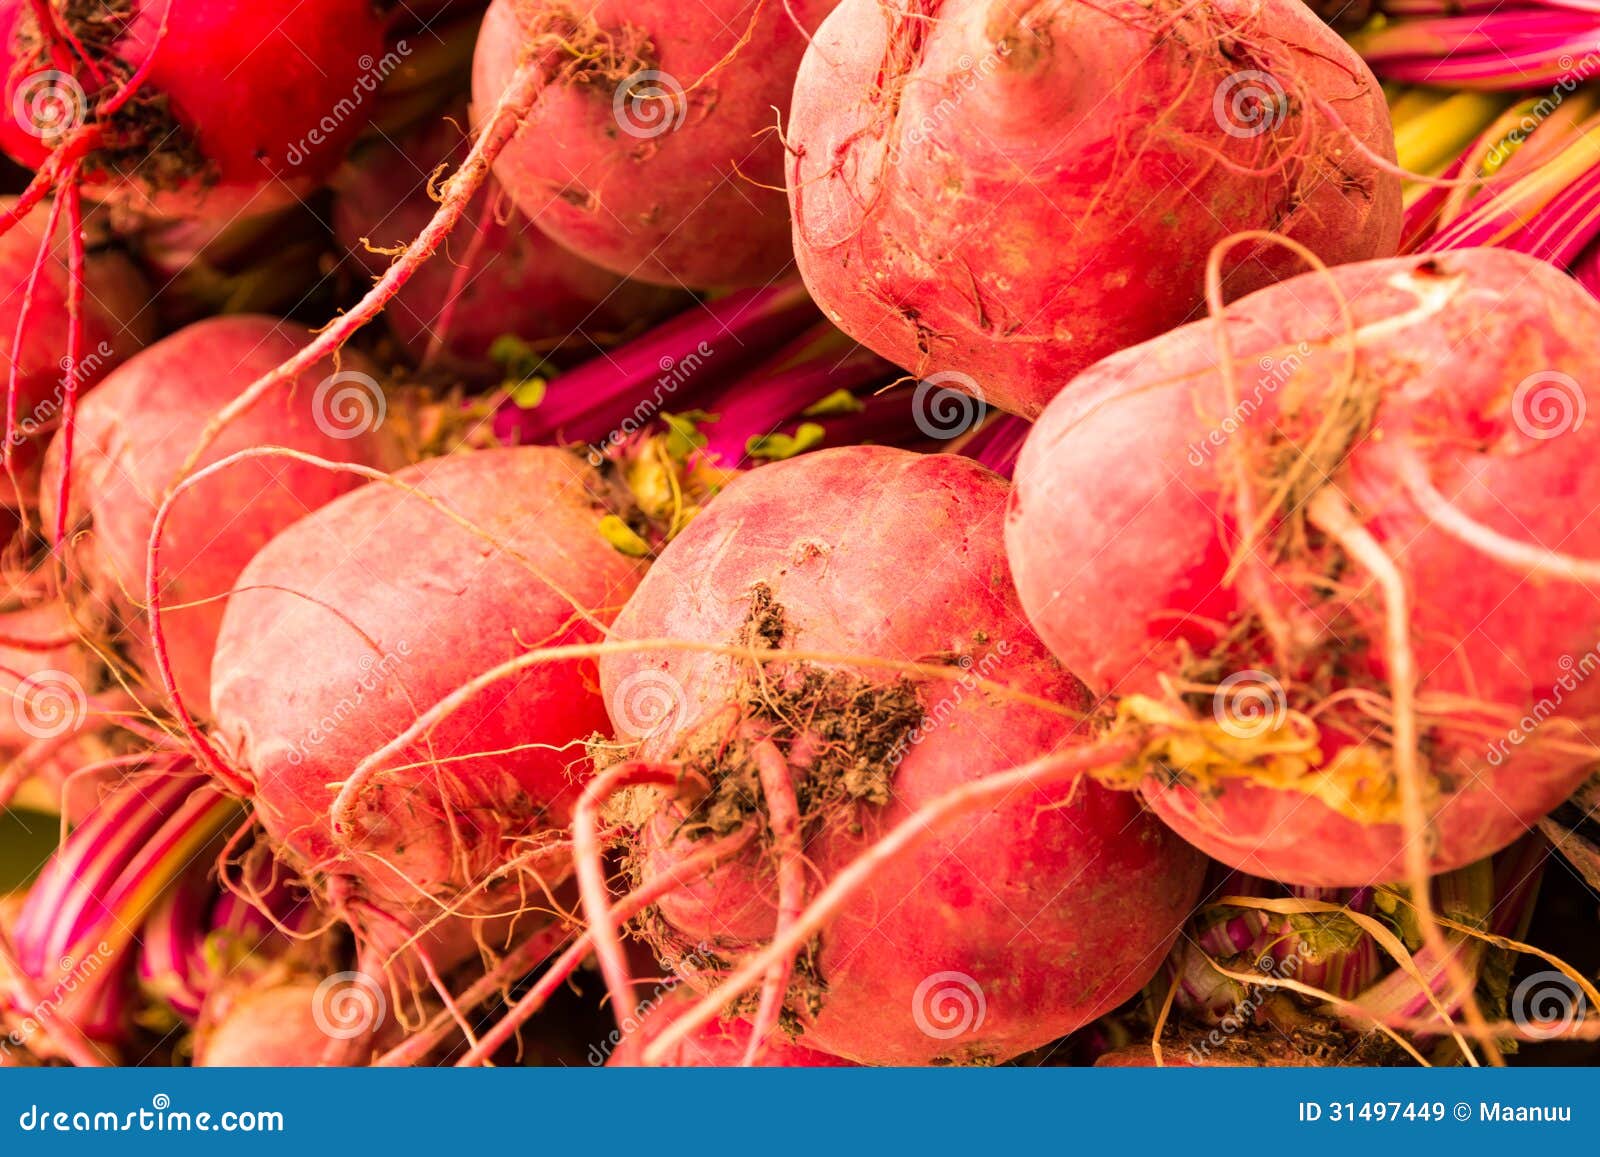 red tubers